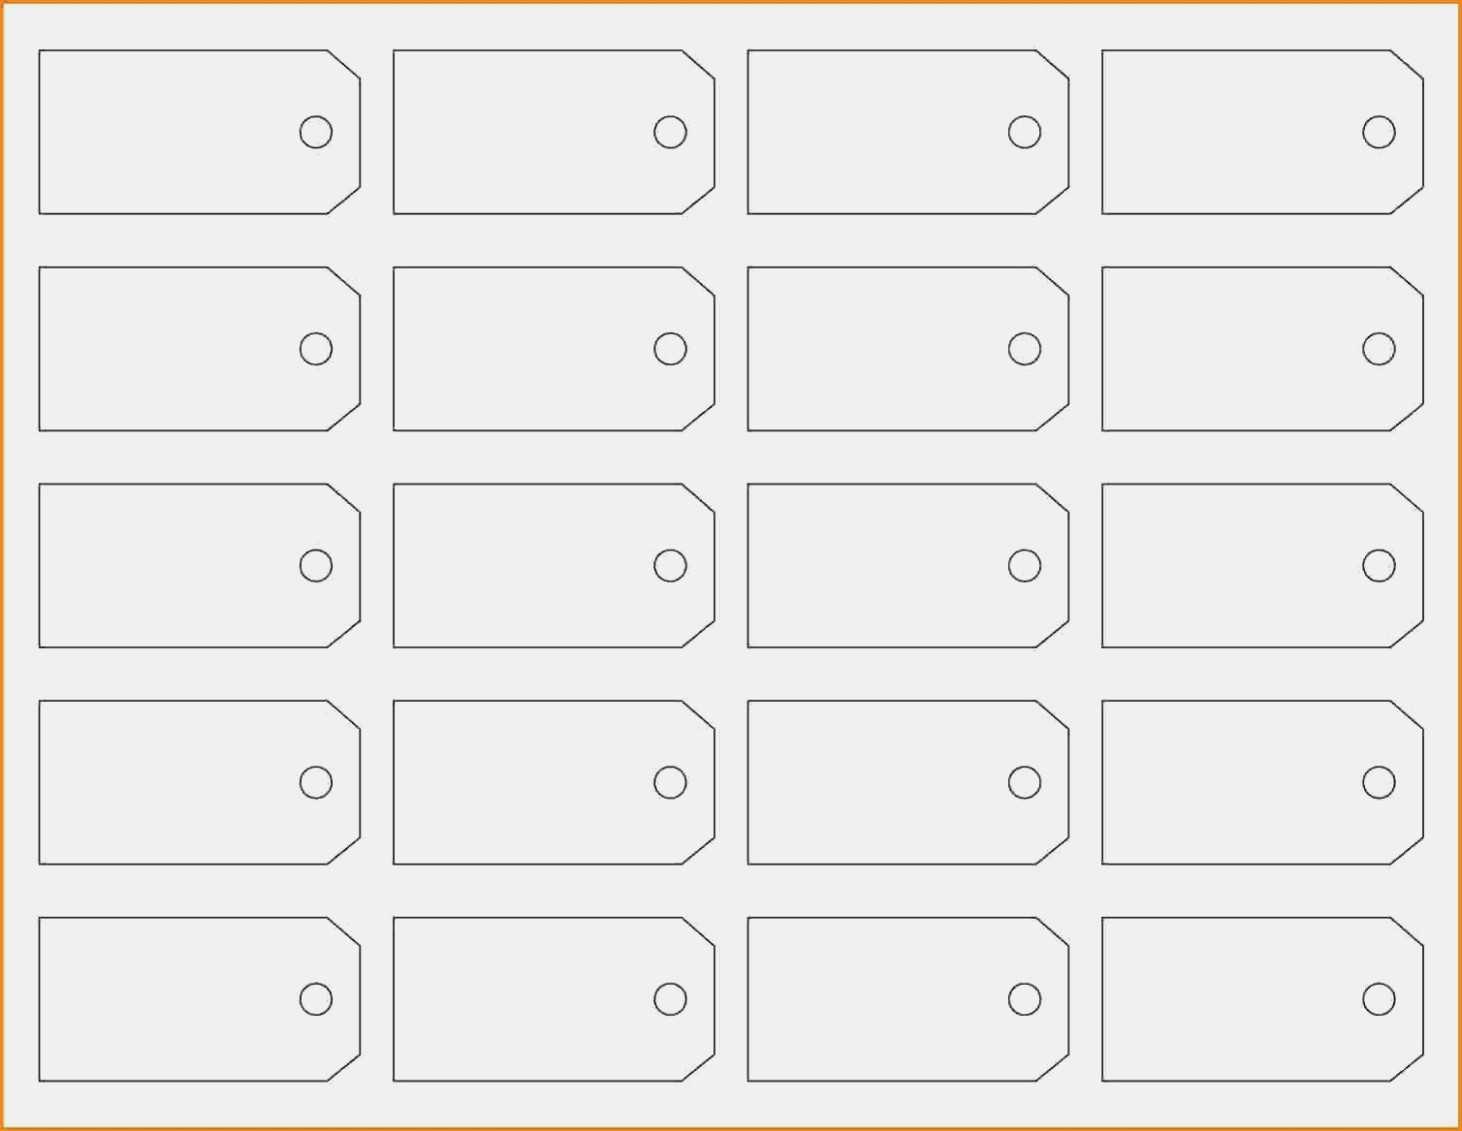 65D9 Evacuee Label Template | Wiring Library Throughout Evacuation Label Template